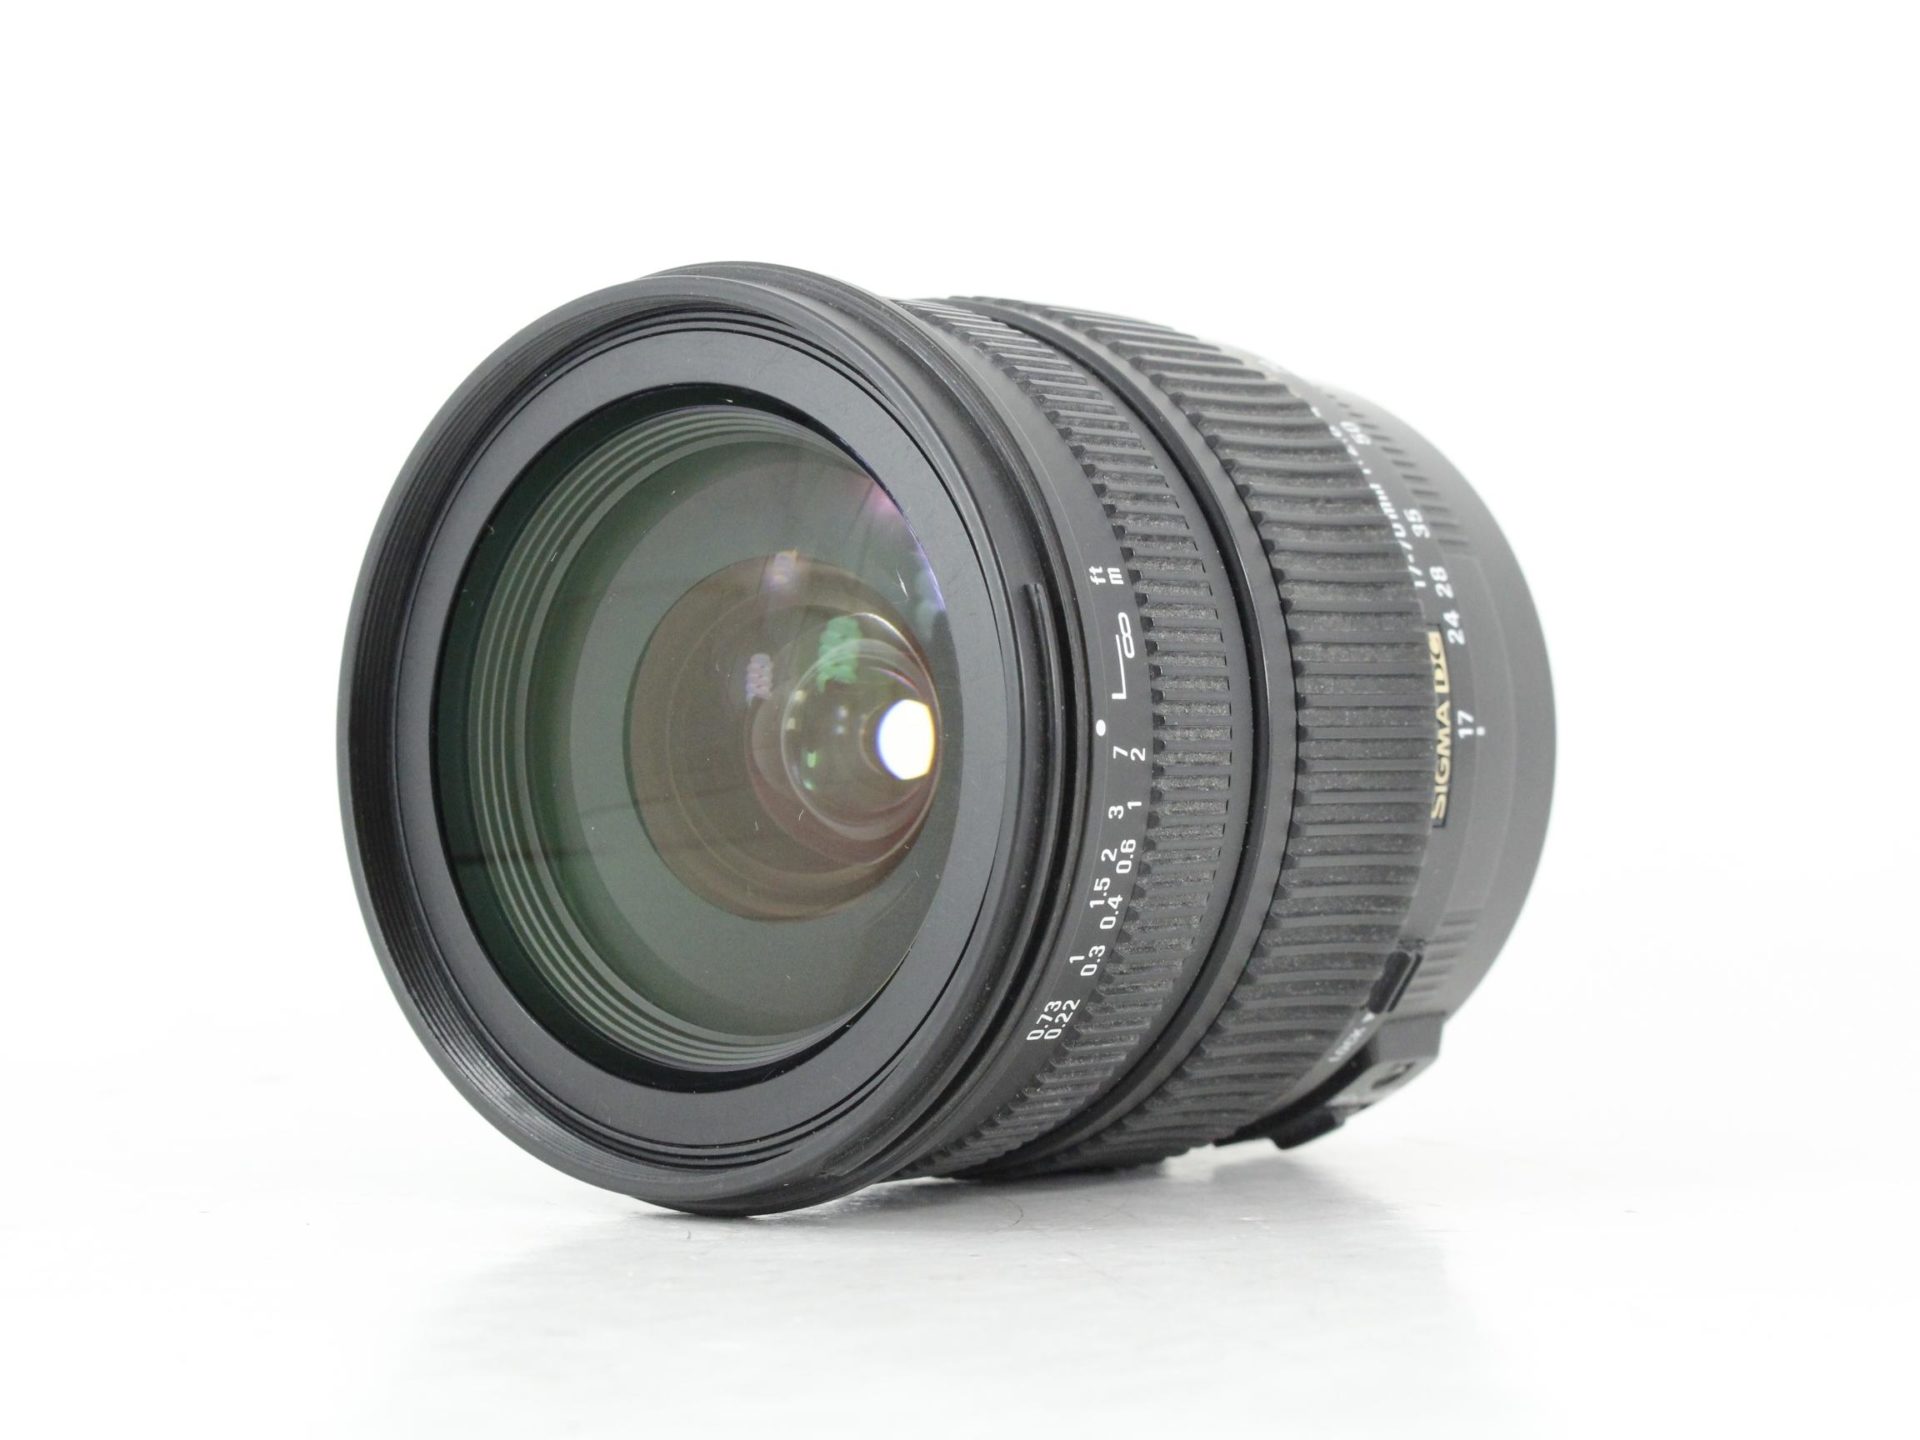 Sigma DC 1770mm F/2.84 OS HSM DC Lens For Canon Lenses